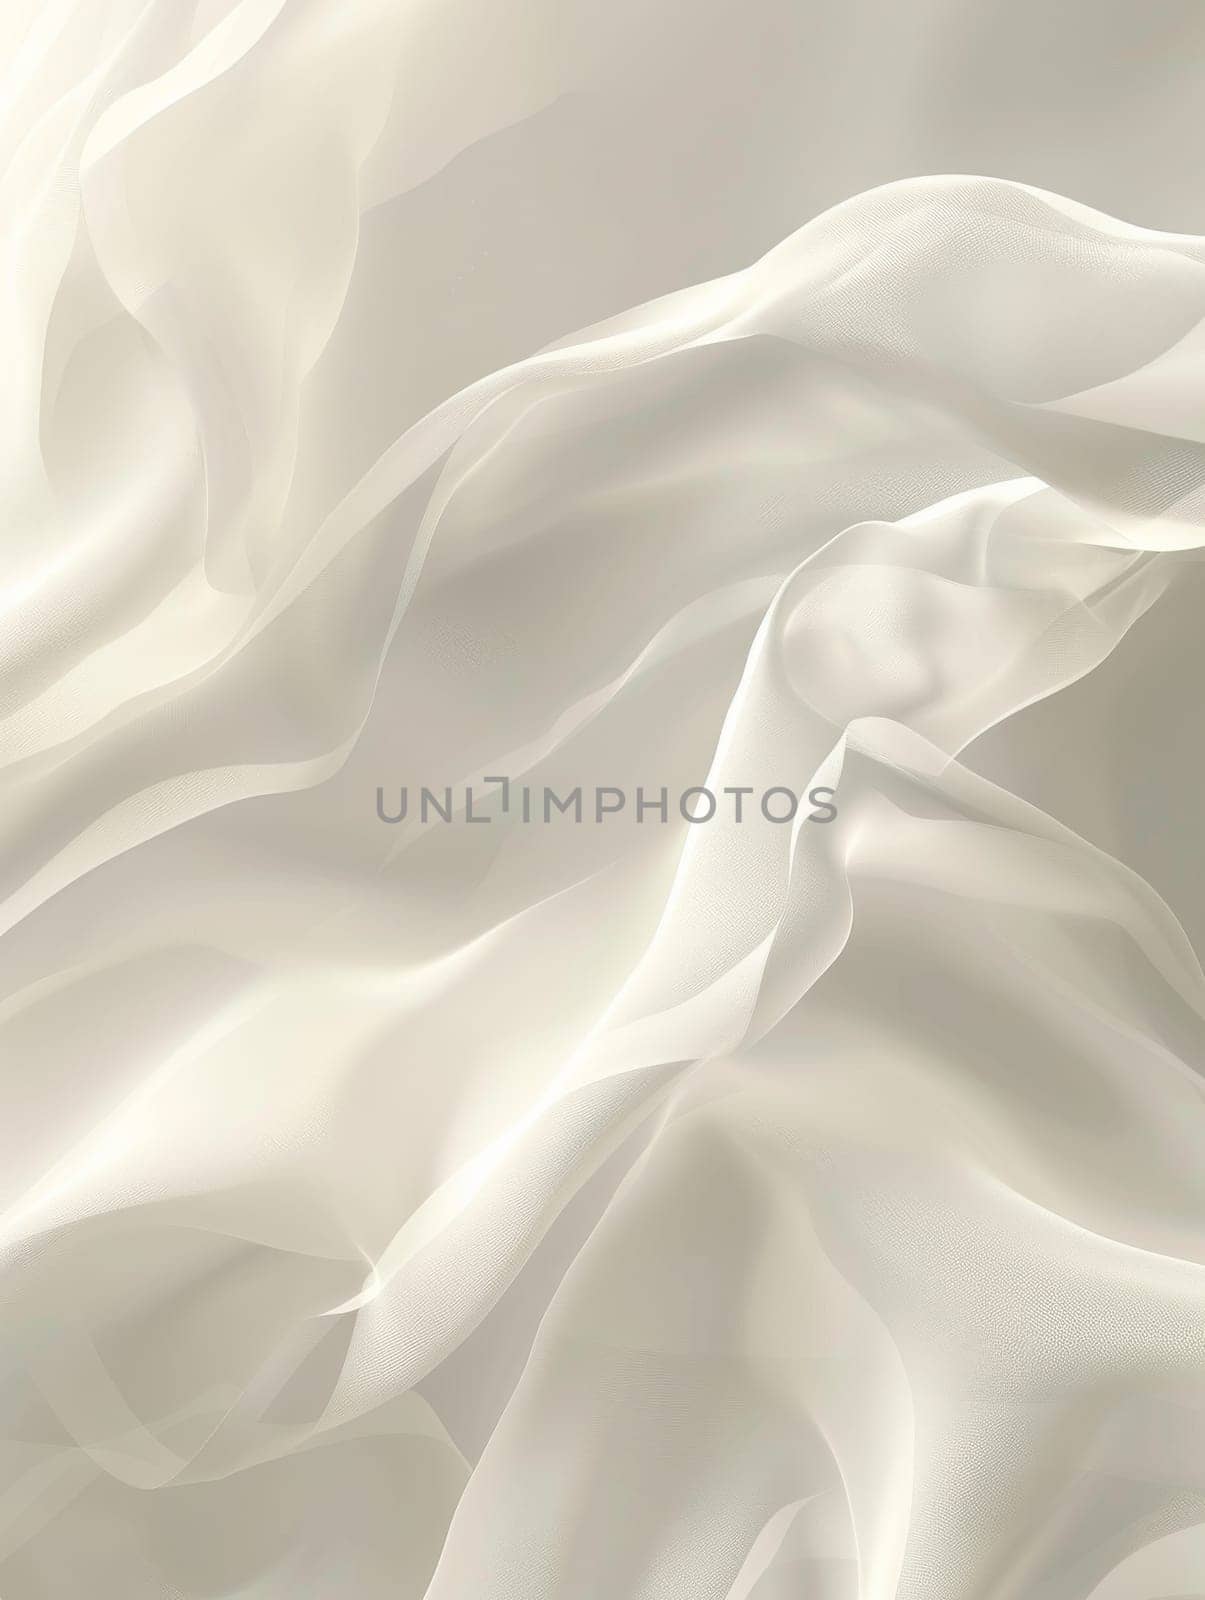 A white fabric with a pattern of waves. The fabric is smooth and silky. The waves are gentle and flowing, creating a sense of calmness and serenity. Scene is peaceful and relaxing